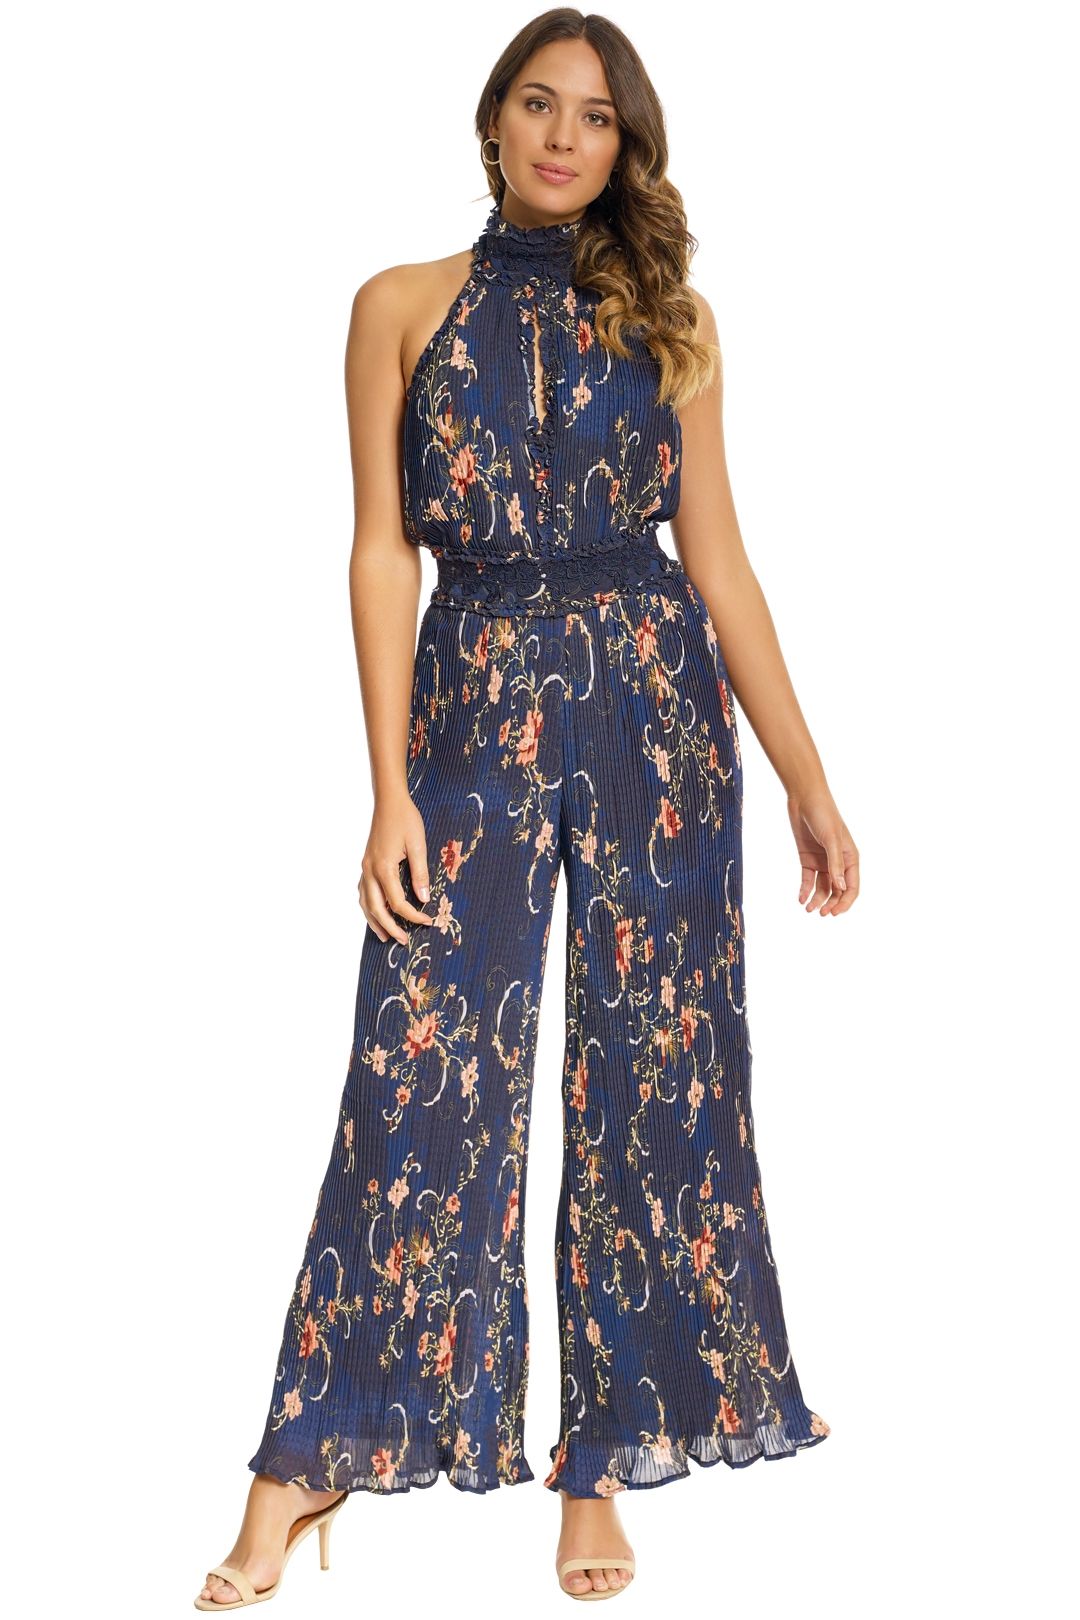 Pippa Ruffle Maxi Dress by We Are Kindred for Rent